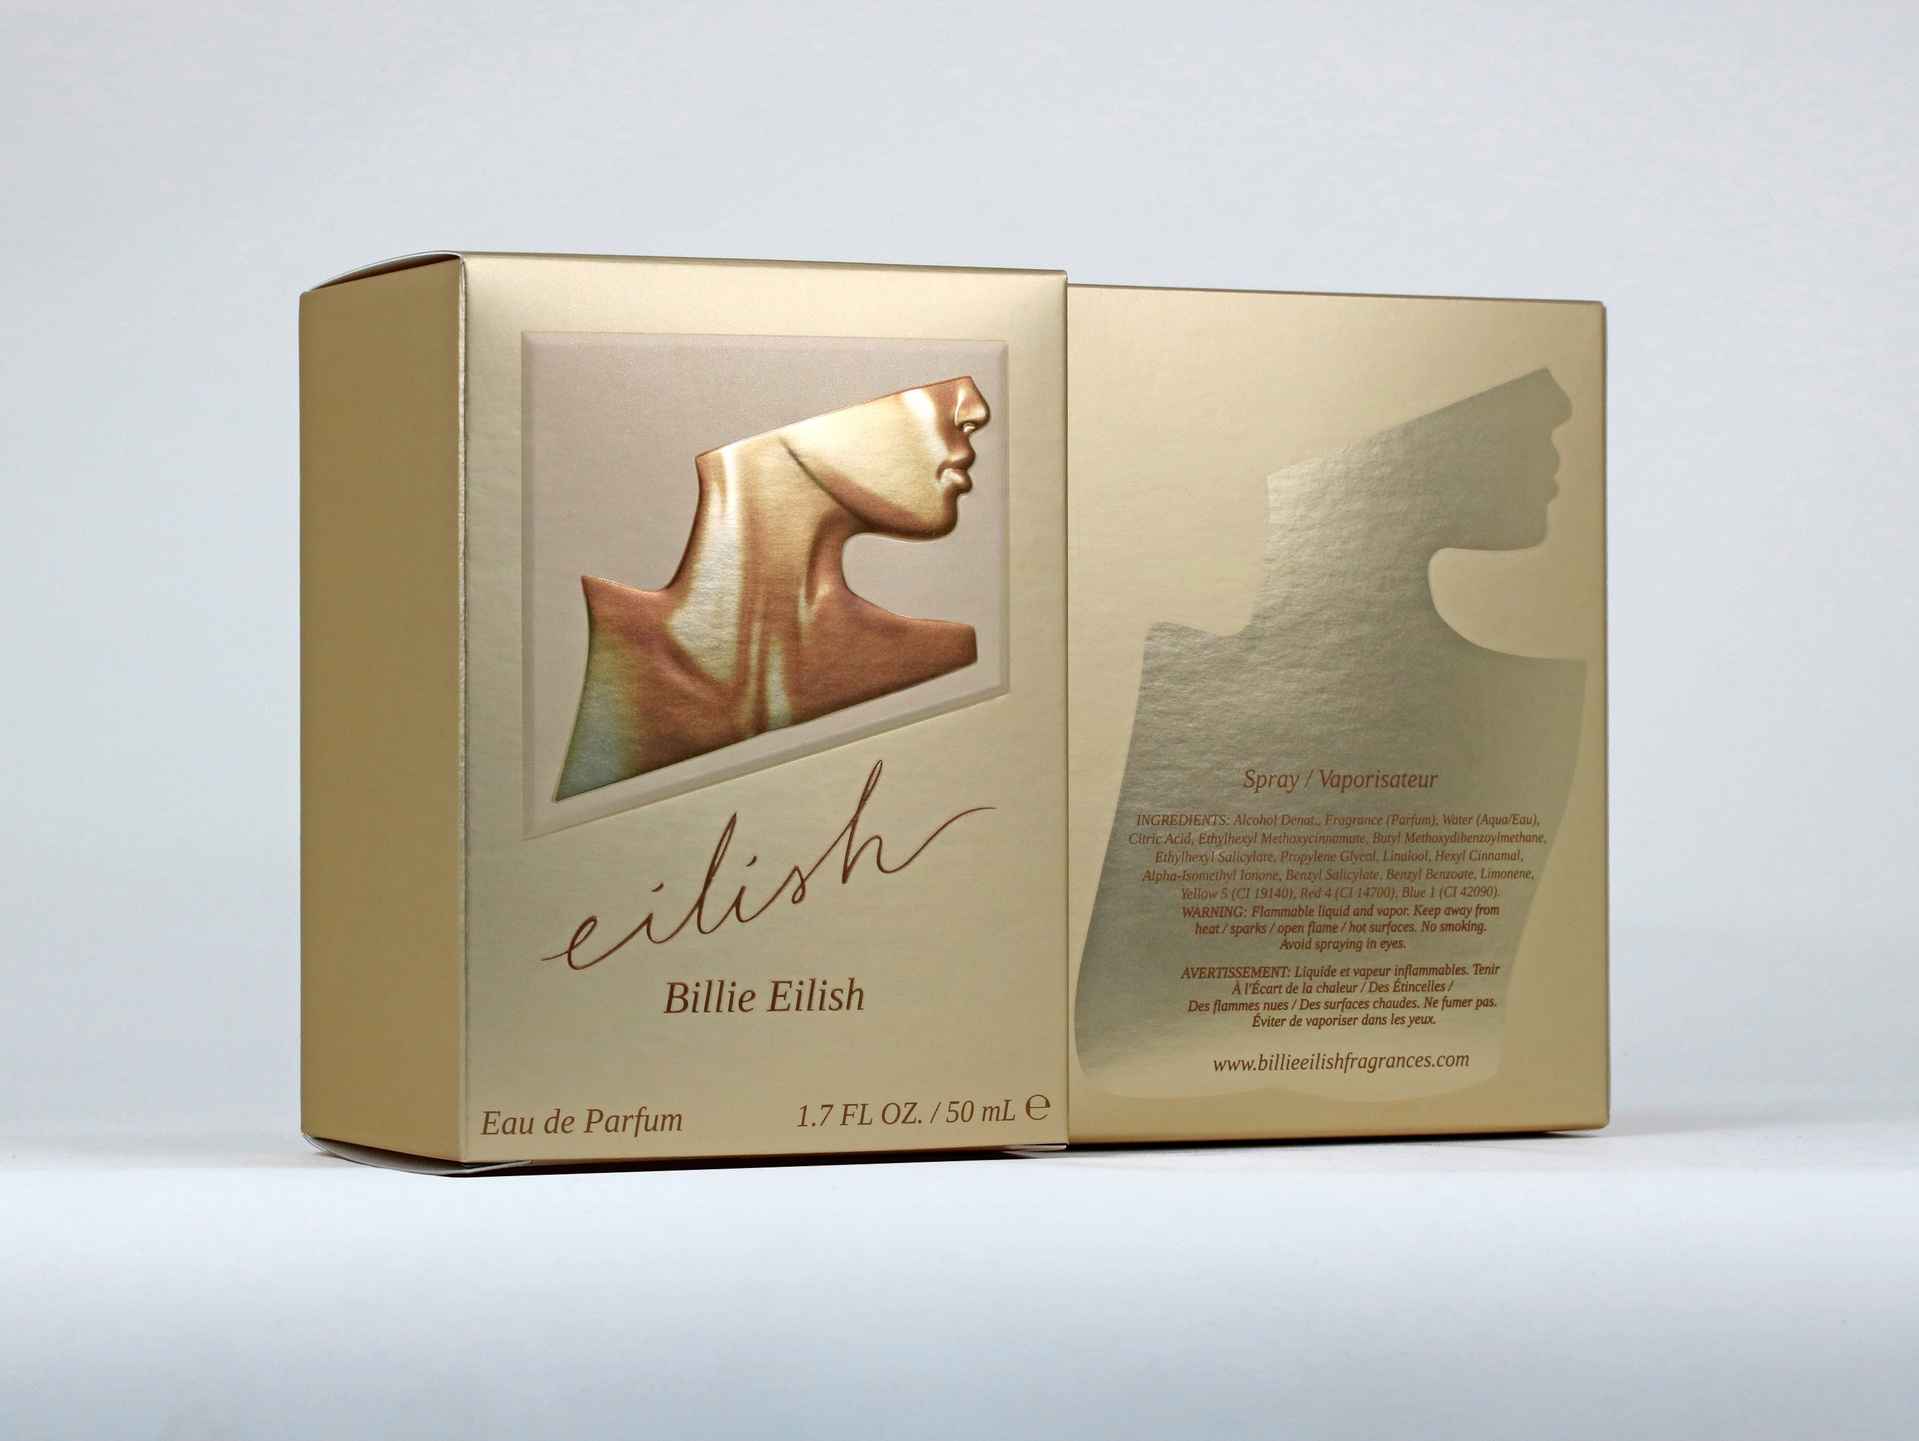 Billie Eilish folding cartons feature soft touch coating, Envirofoil, and multi-level embossing